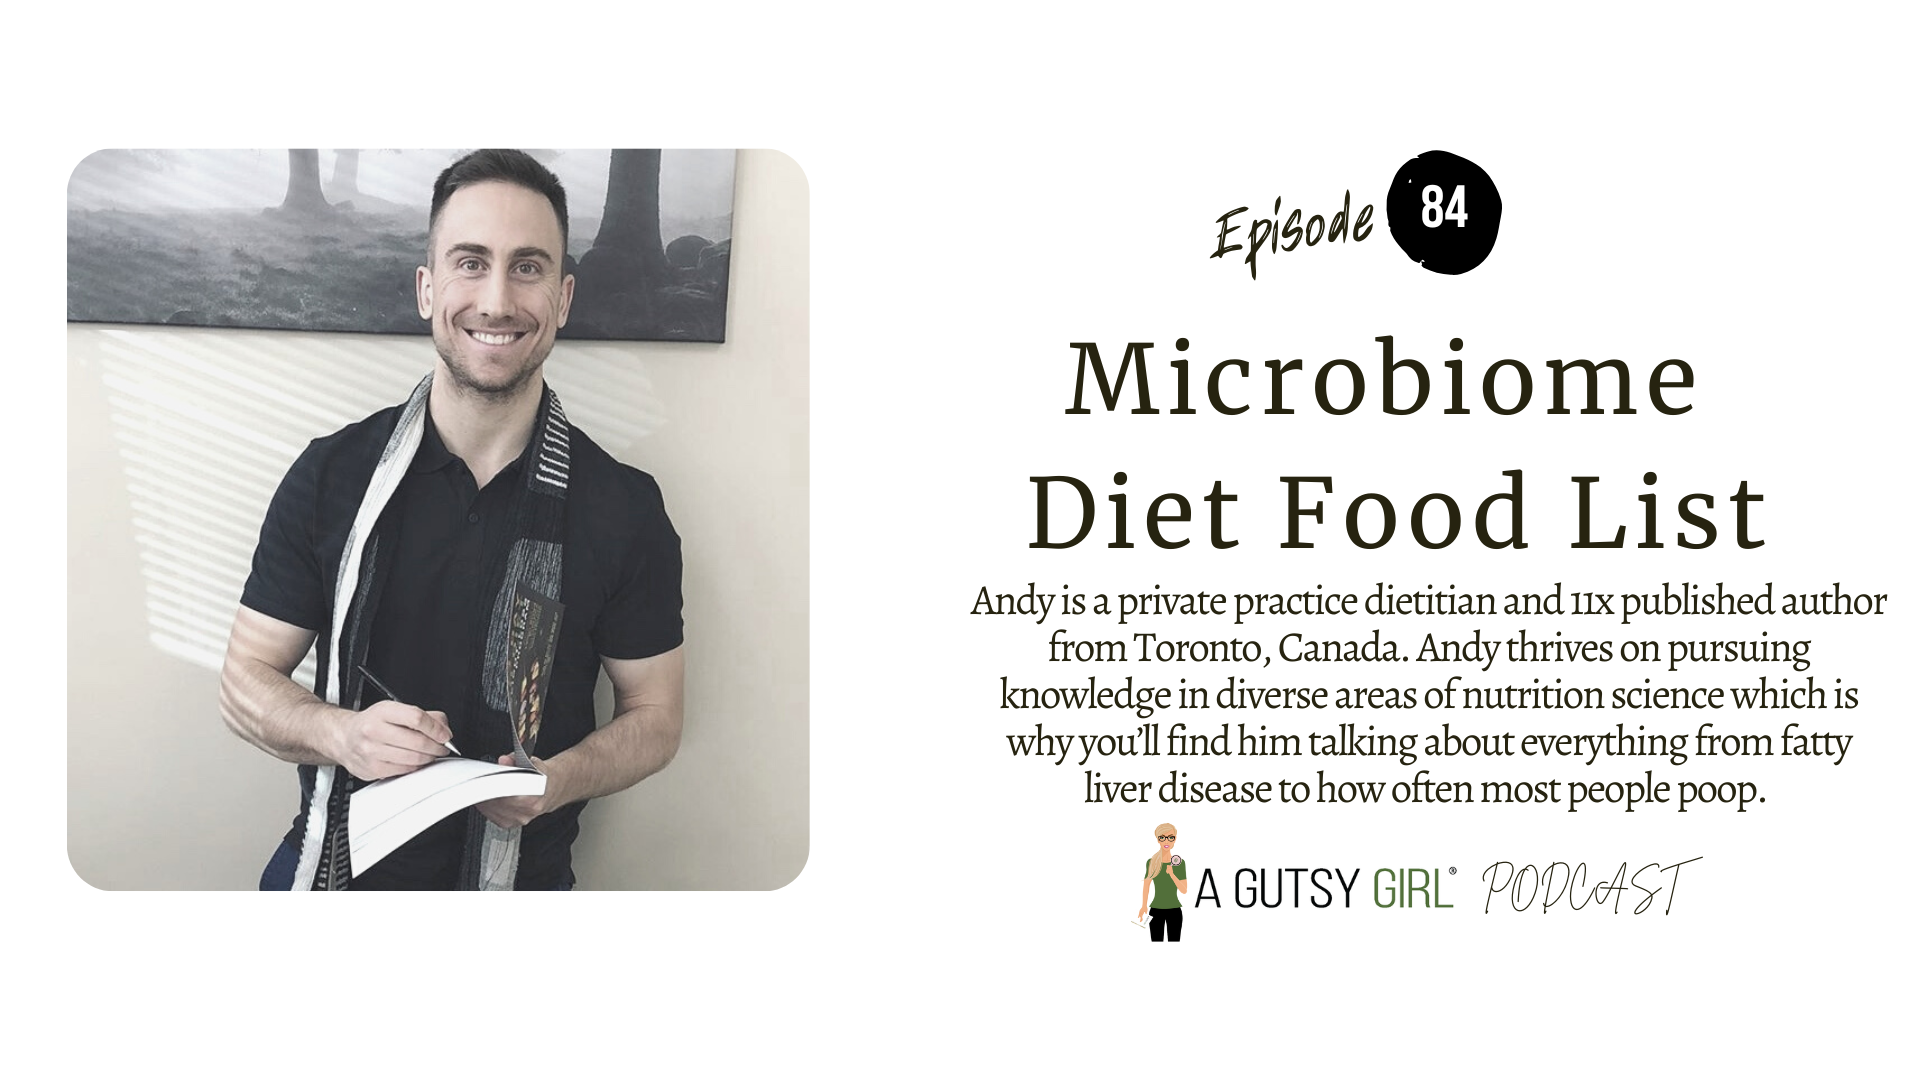 Microbiome Diet Food List (Episode 84 with AndytheRD)